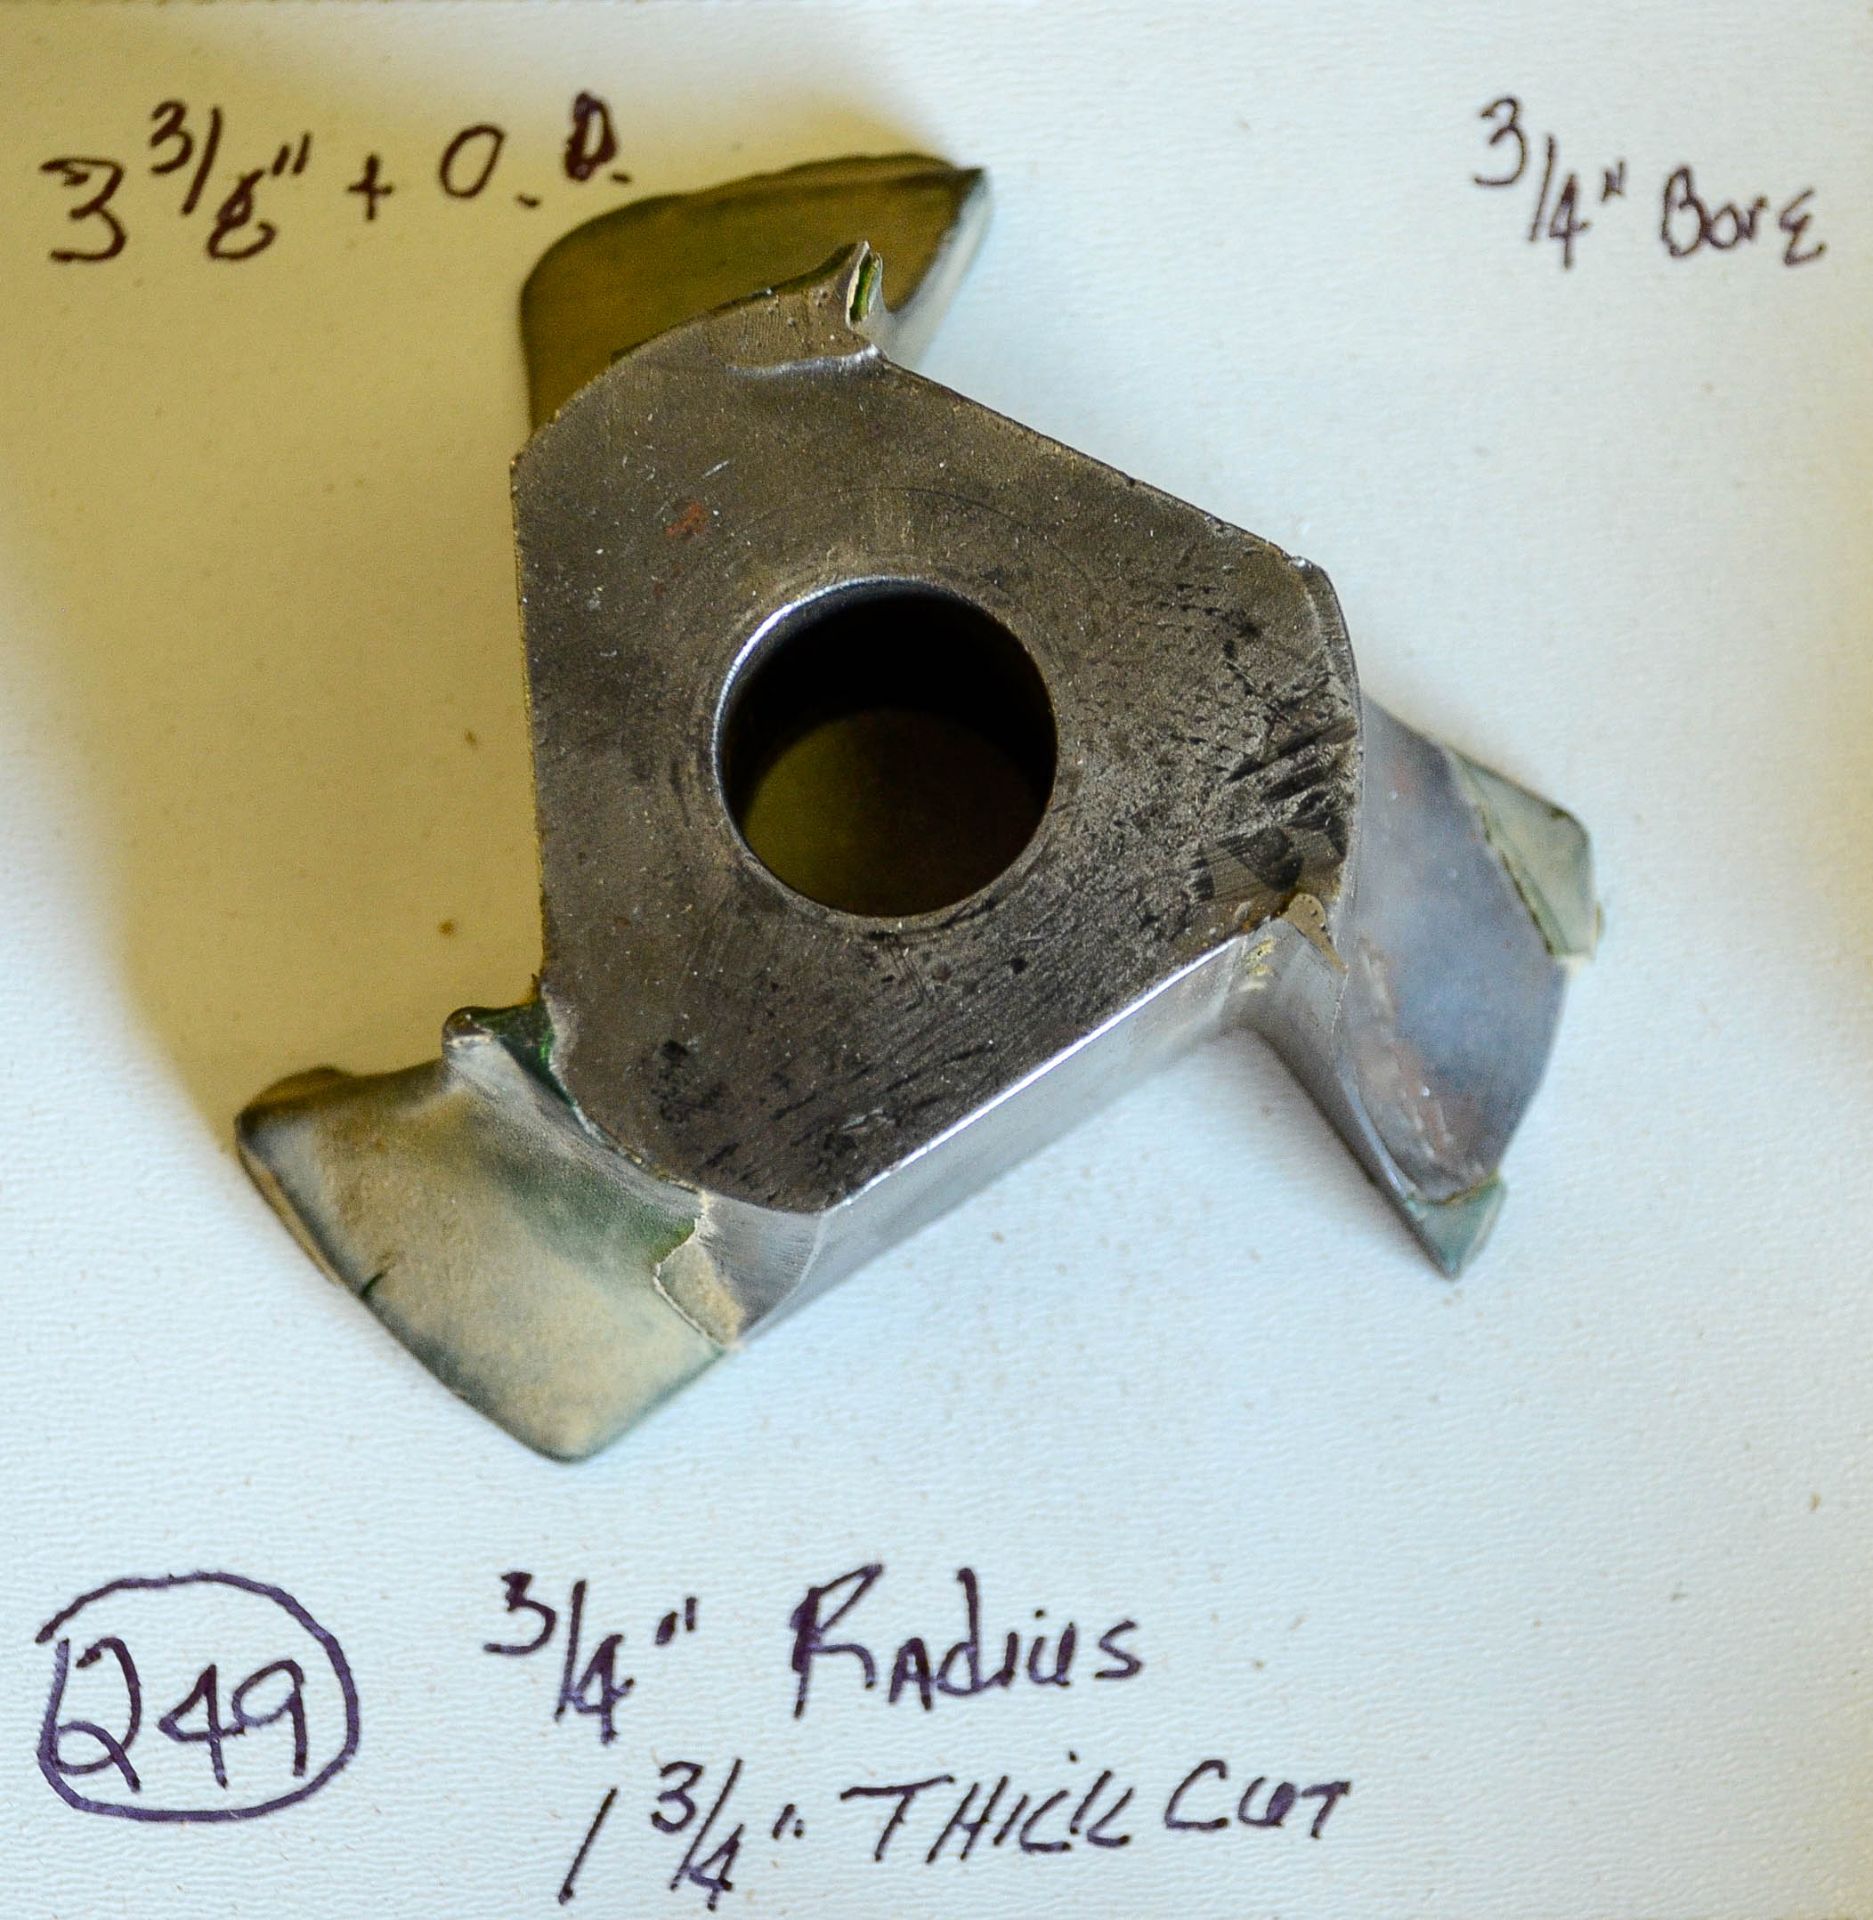 Shaper Cutter, 3/4" Radius, 1-3/4" Thick Cut, 3-3/8" Outside Diameter, 3/4" Bore, See Pics for